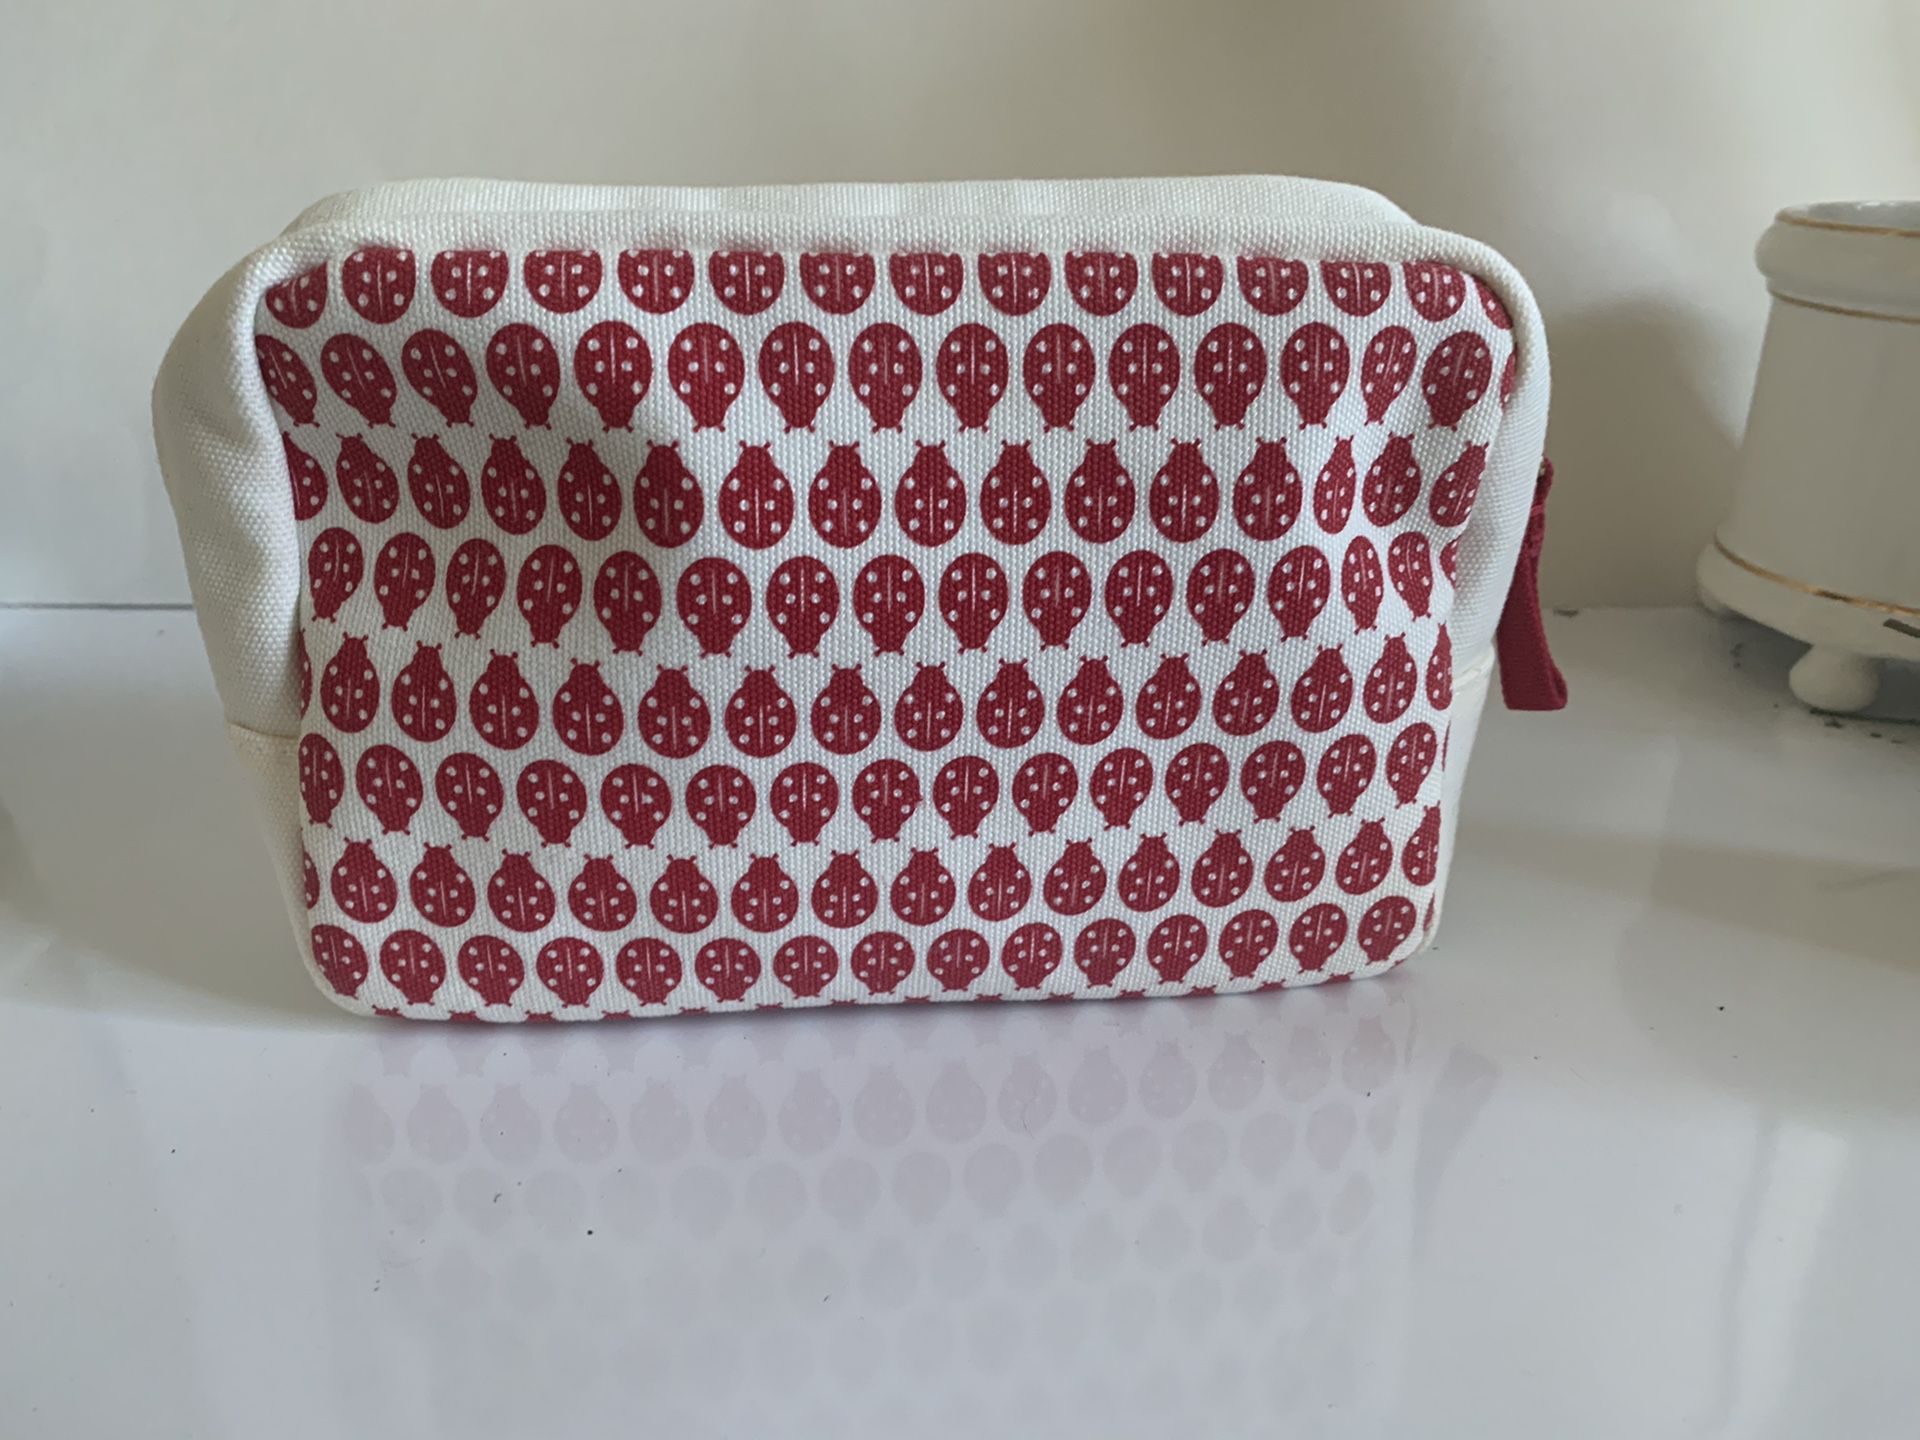 Clarins Paris Fabric Lady Bug Makeup Bag. 8 inches wide, 5 inches tall, 3 inches width. Ivory with red ( lady bags) and black accents, red zipper. 💯